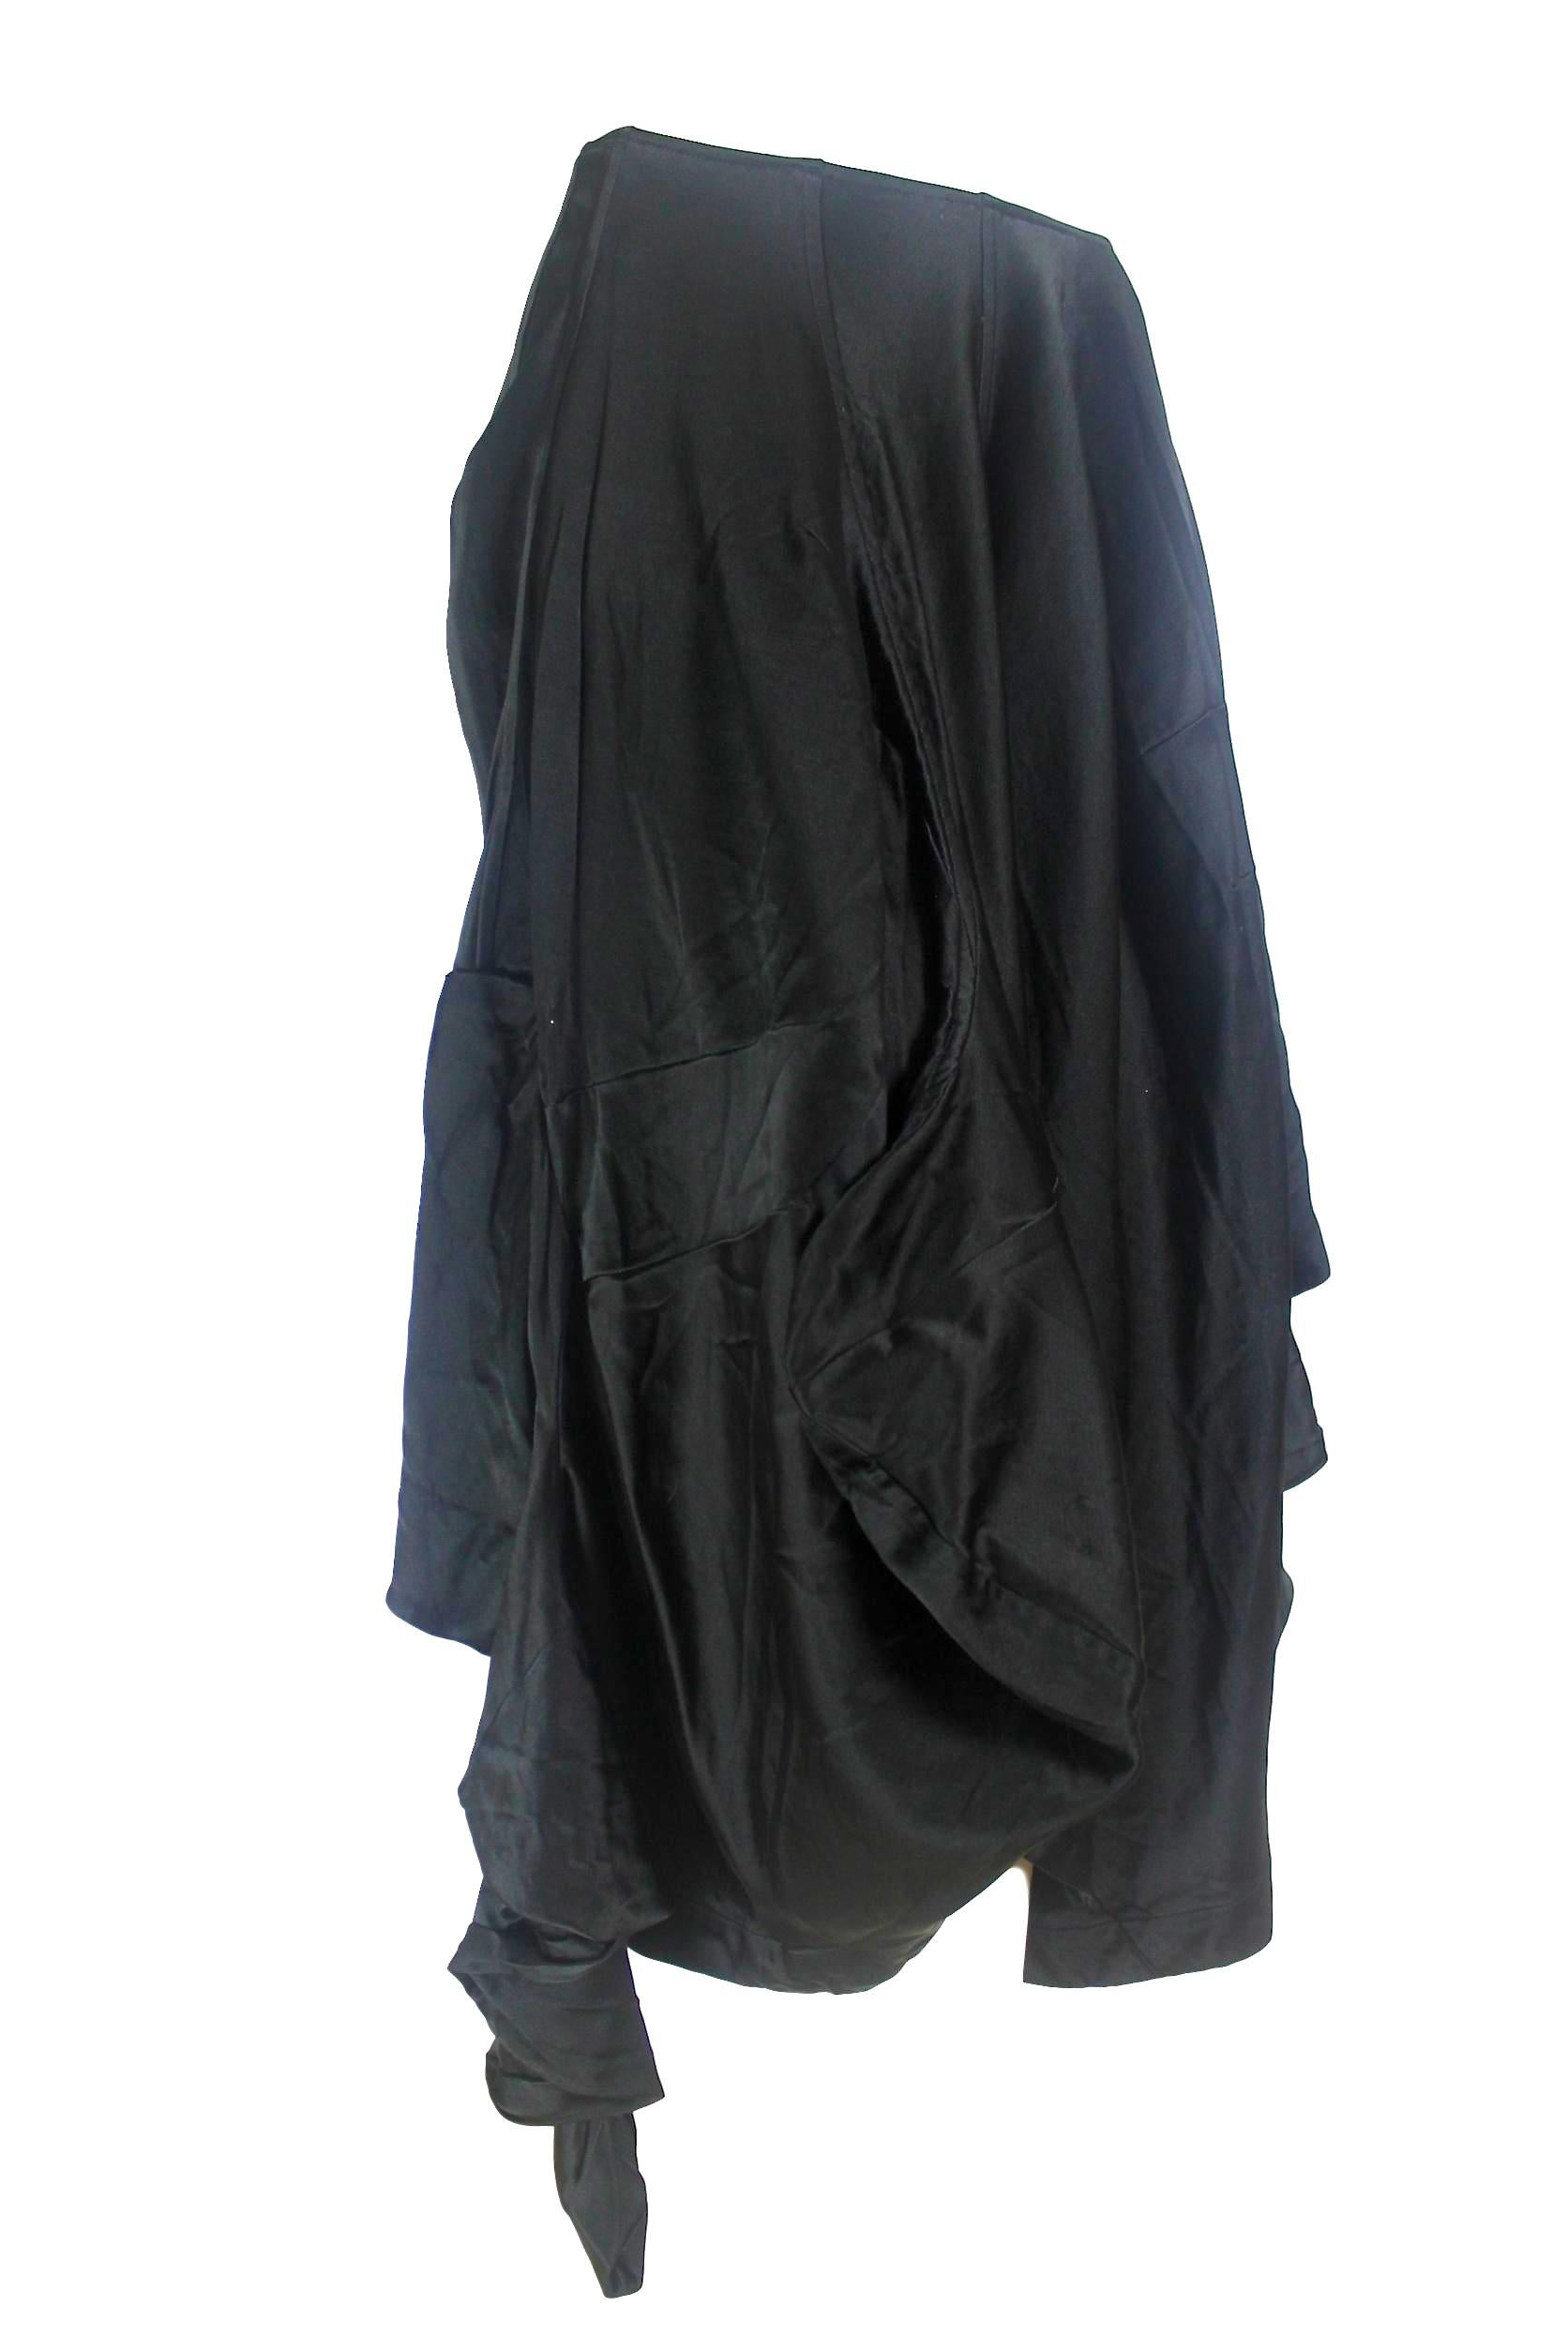 Comme des Garcons Wool/Silk Twisted Sleeve Skirt AD 2004 Dark Romance For Sale 6